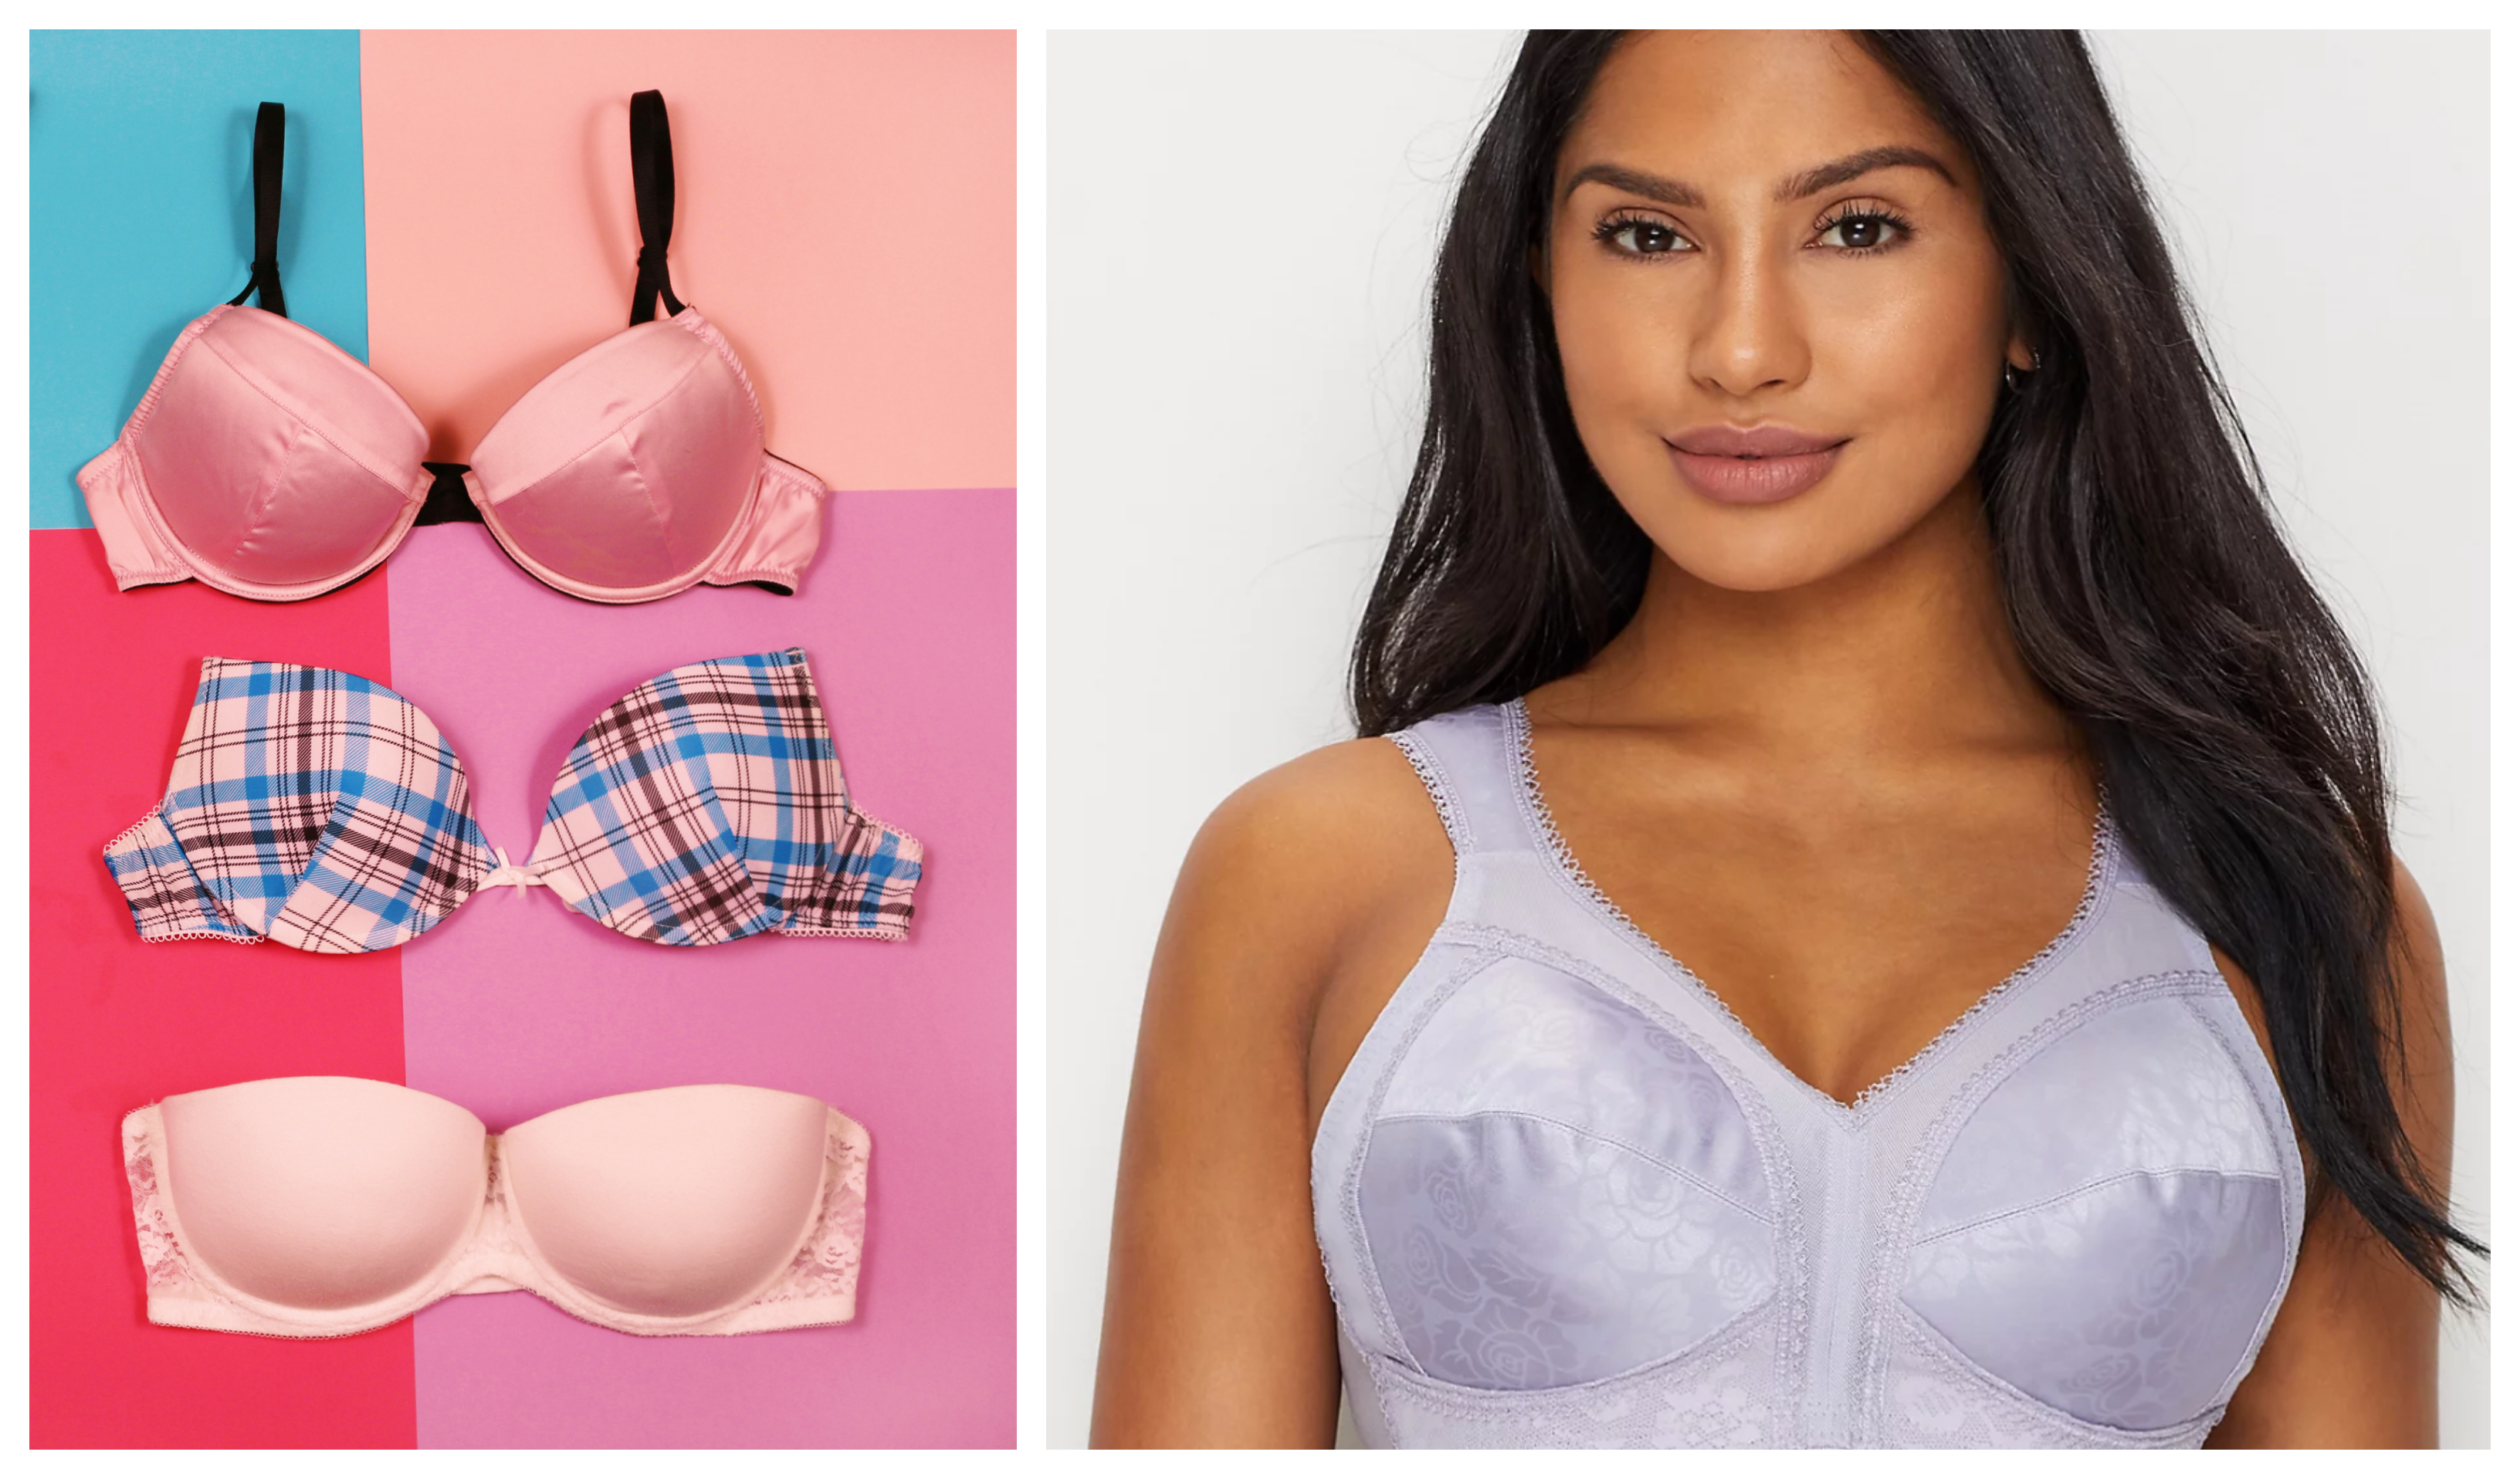 This Bare Necessities Sale Is Selling The Best-Fitting Bras And Panties |  